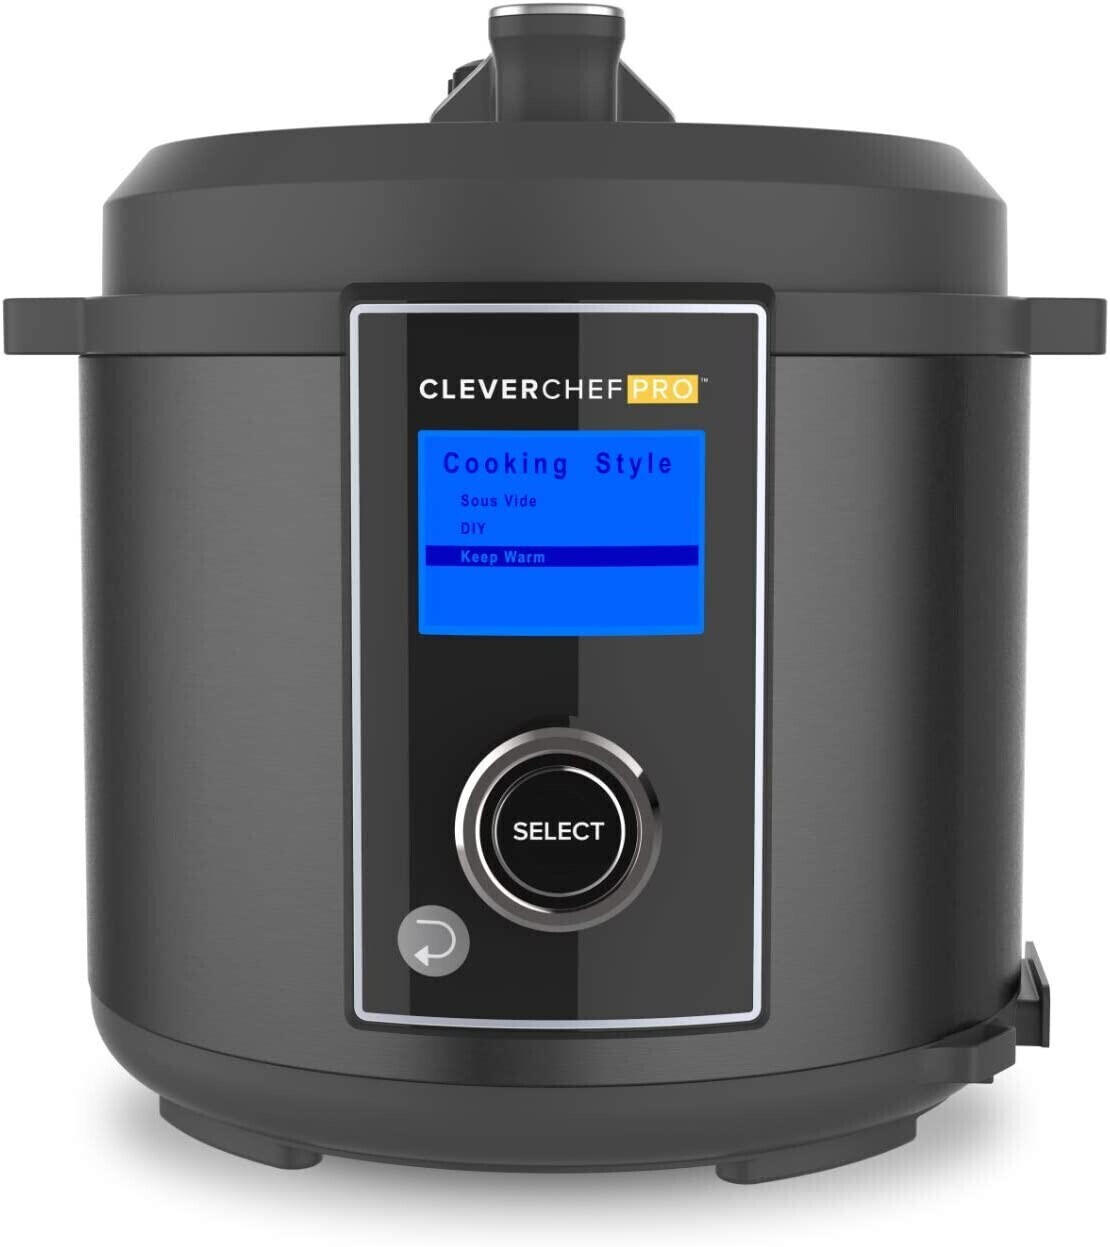 Drew & Cole Clever Chef Pro Multicooker Charcoal